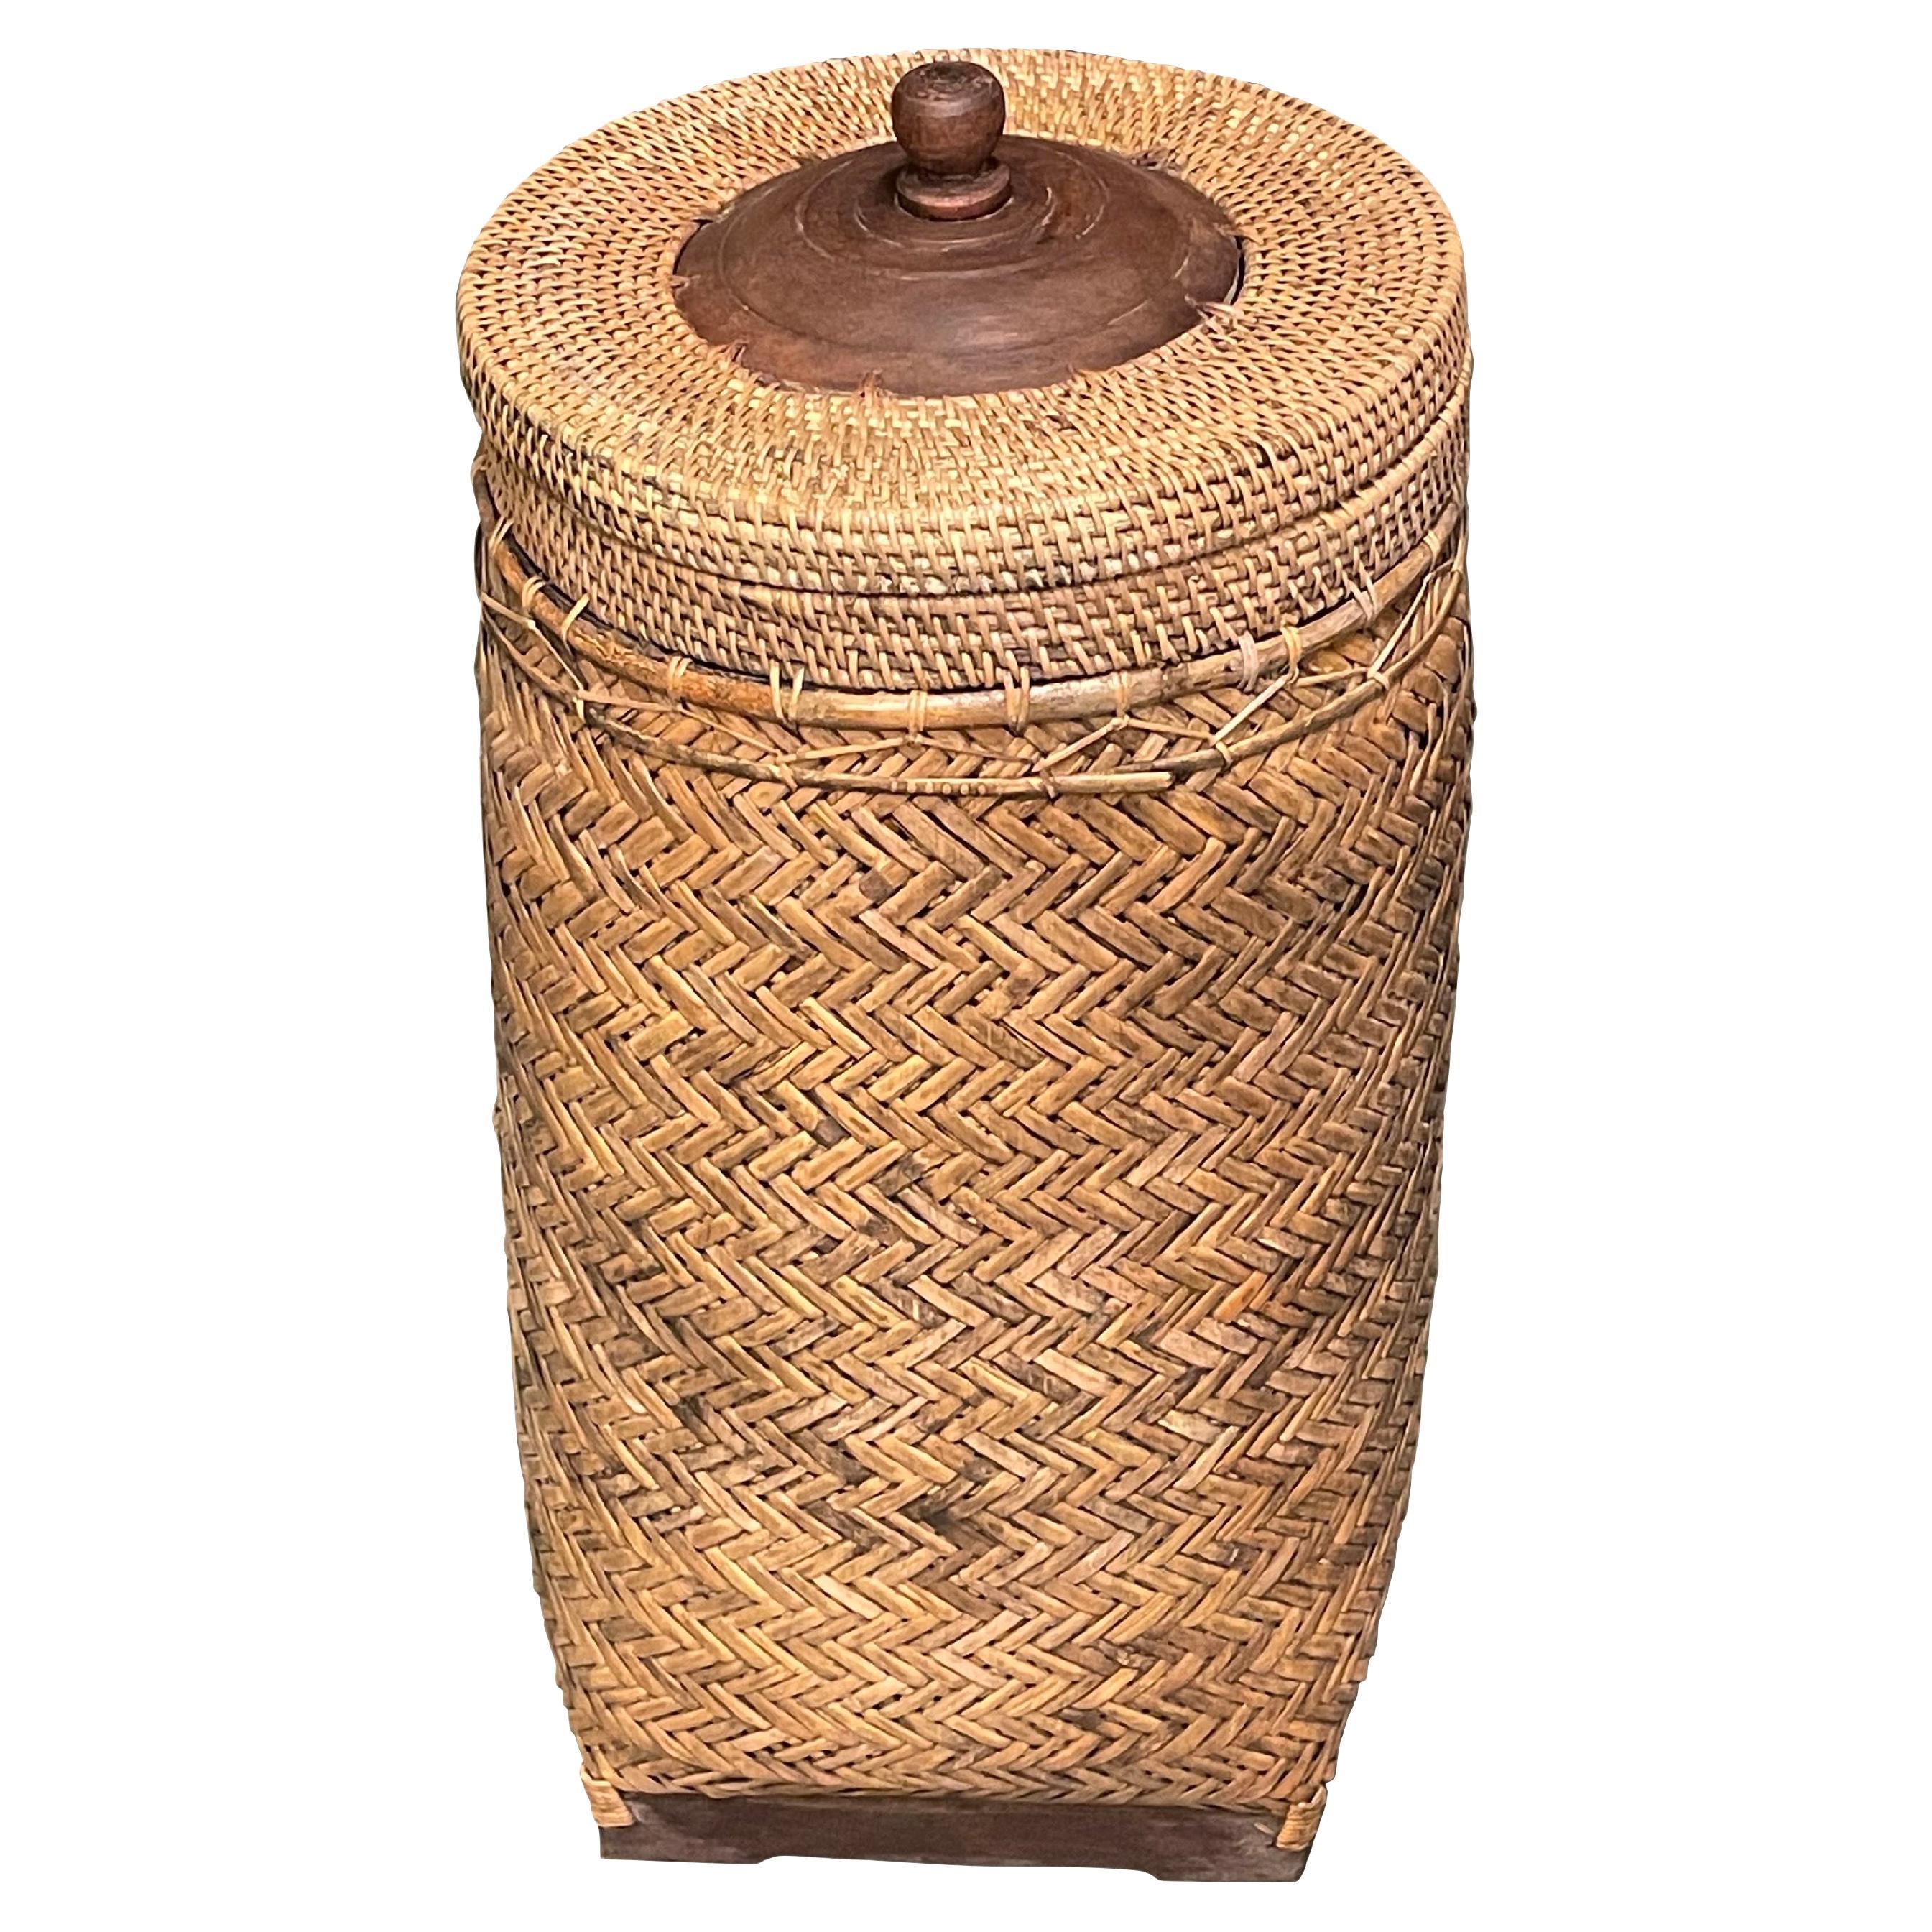 Tall Woven Wicker Lidded Basket, Indonesia, Contemporary